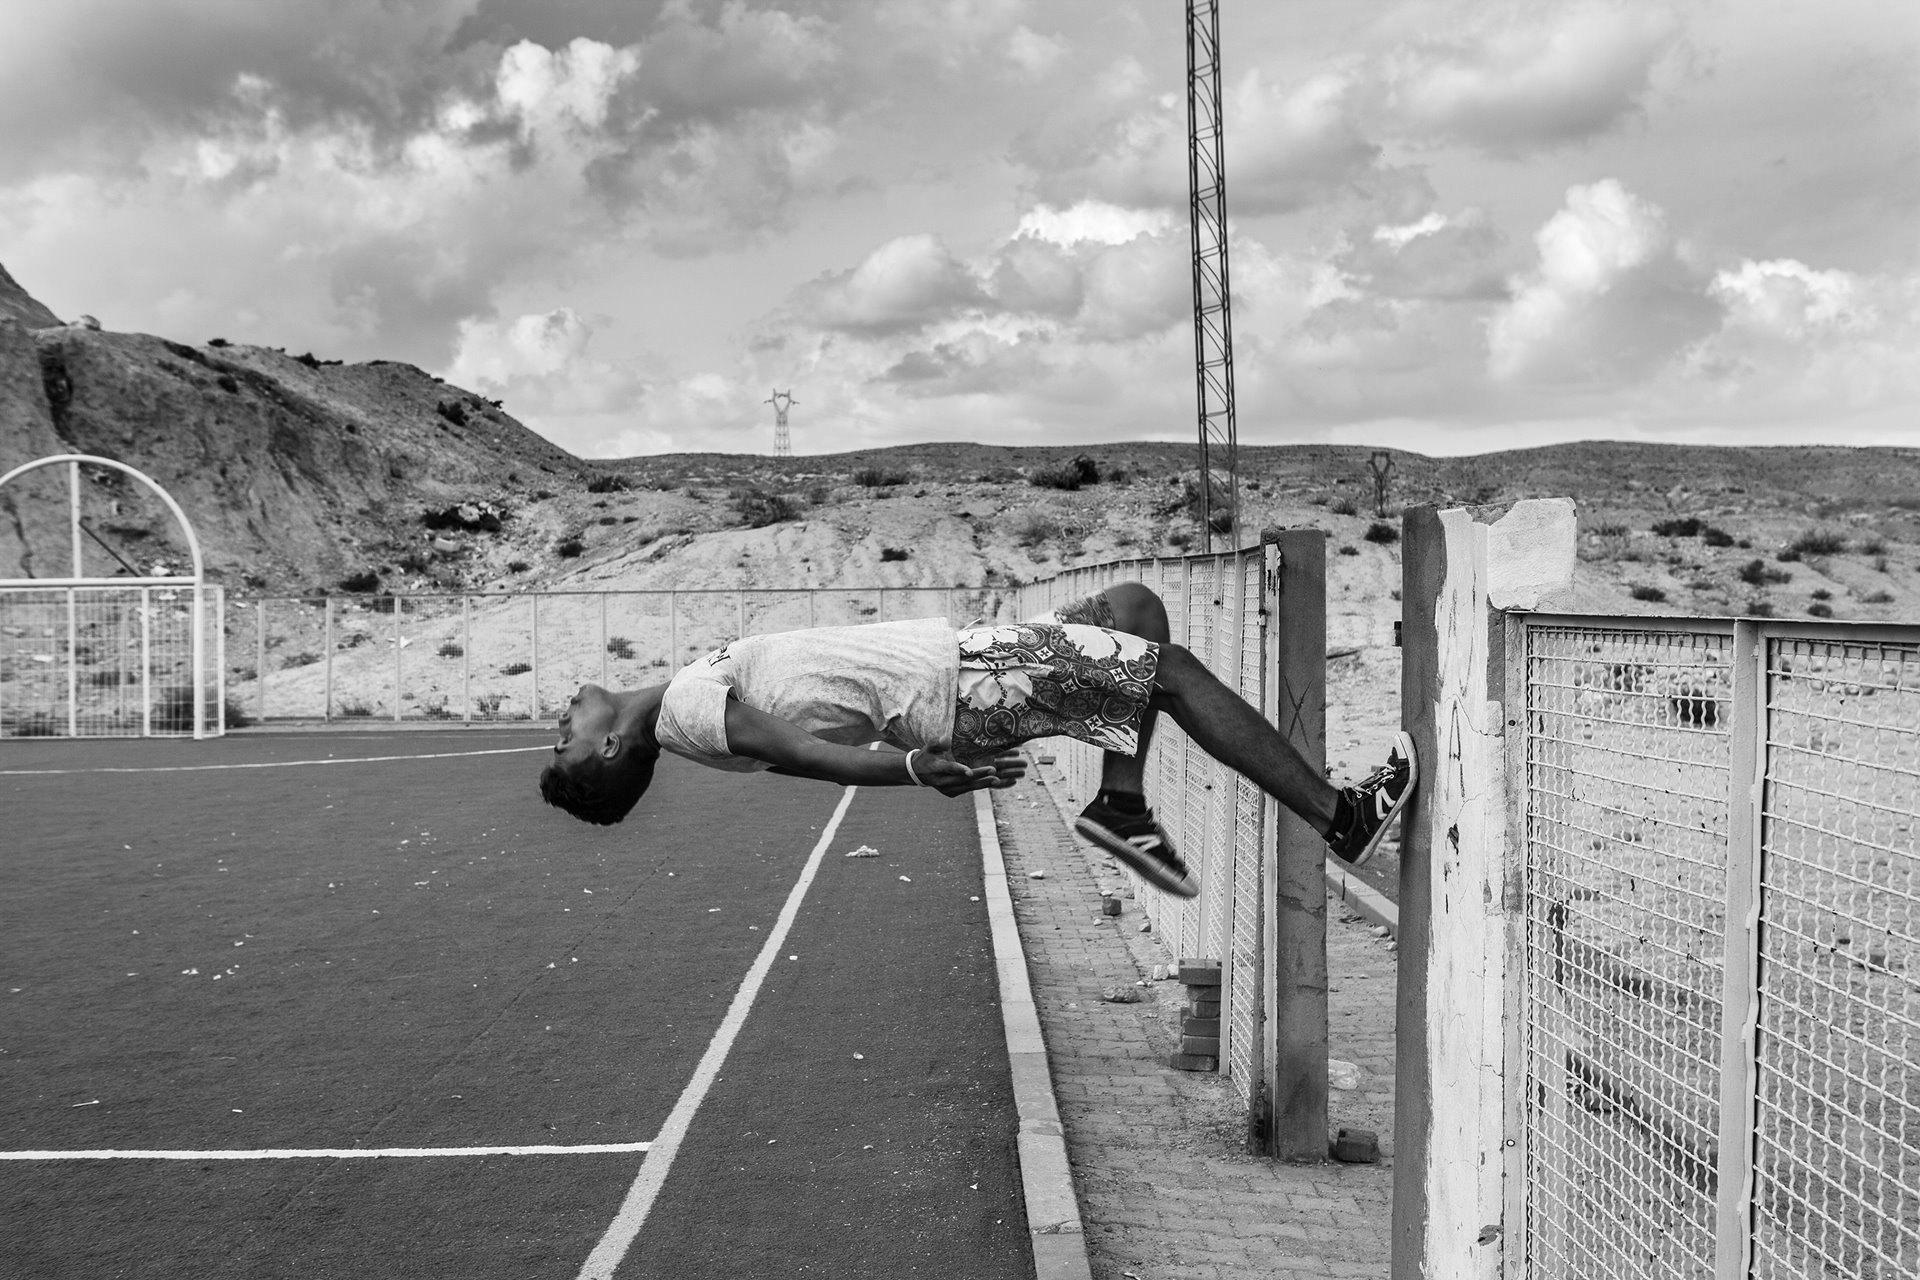 A young man bounces off a fence-post in a soccer field in Umm-Al-Arais, Gafsa, a region crucial to the Tunisian economy for its phosphate mines and marked by high youth unemployment. Earlier in the year jobless young people and miners had staged sit-ins protesting working conditions and unemployment.&nbsp;